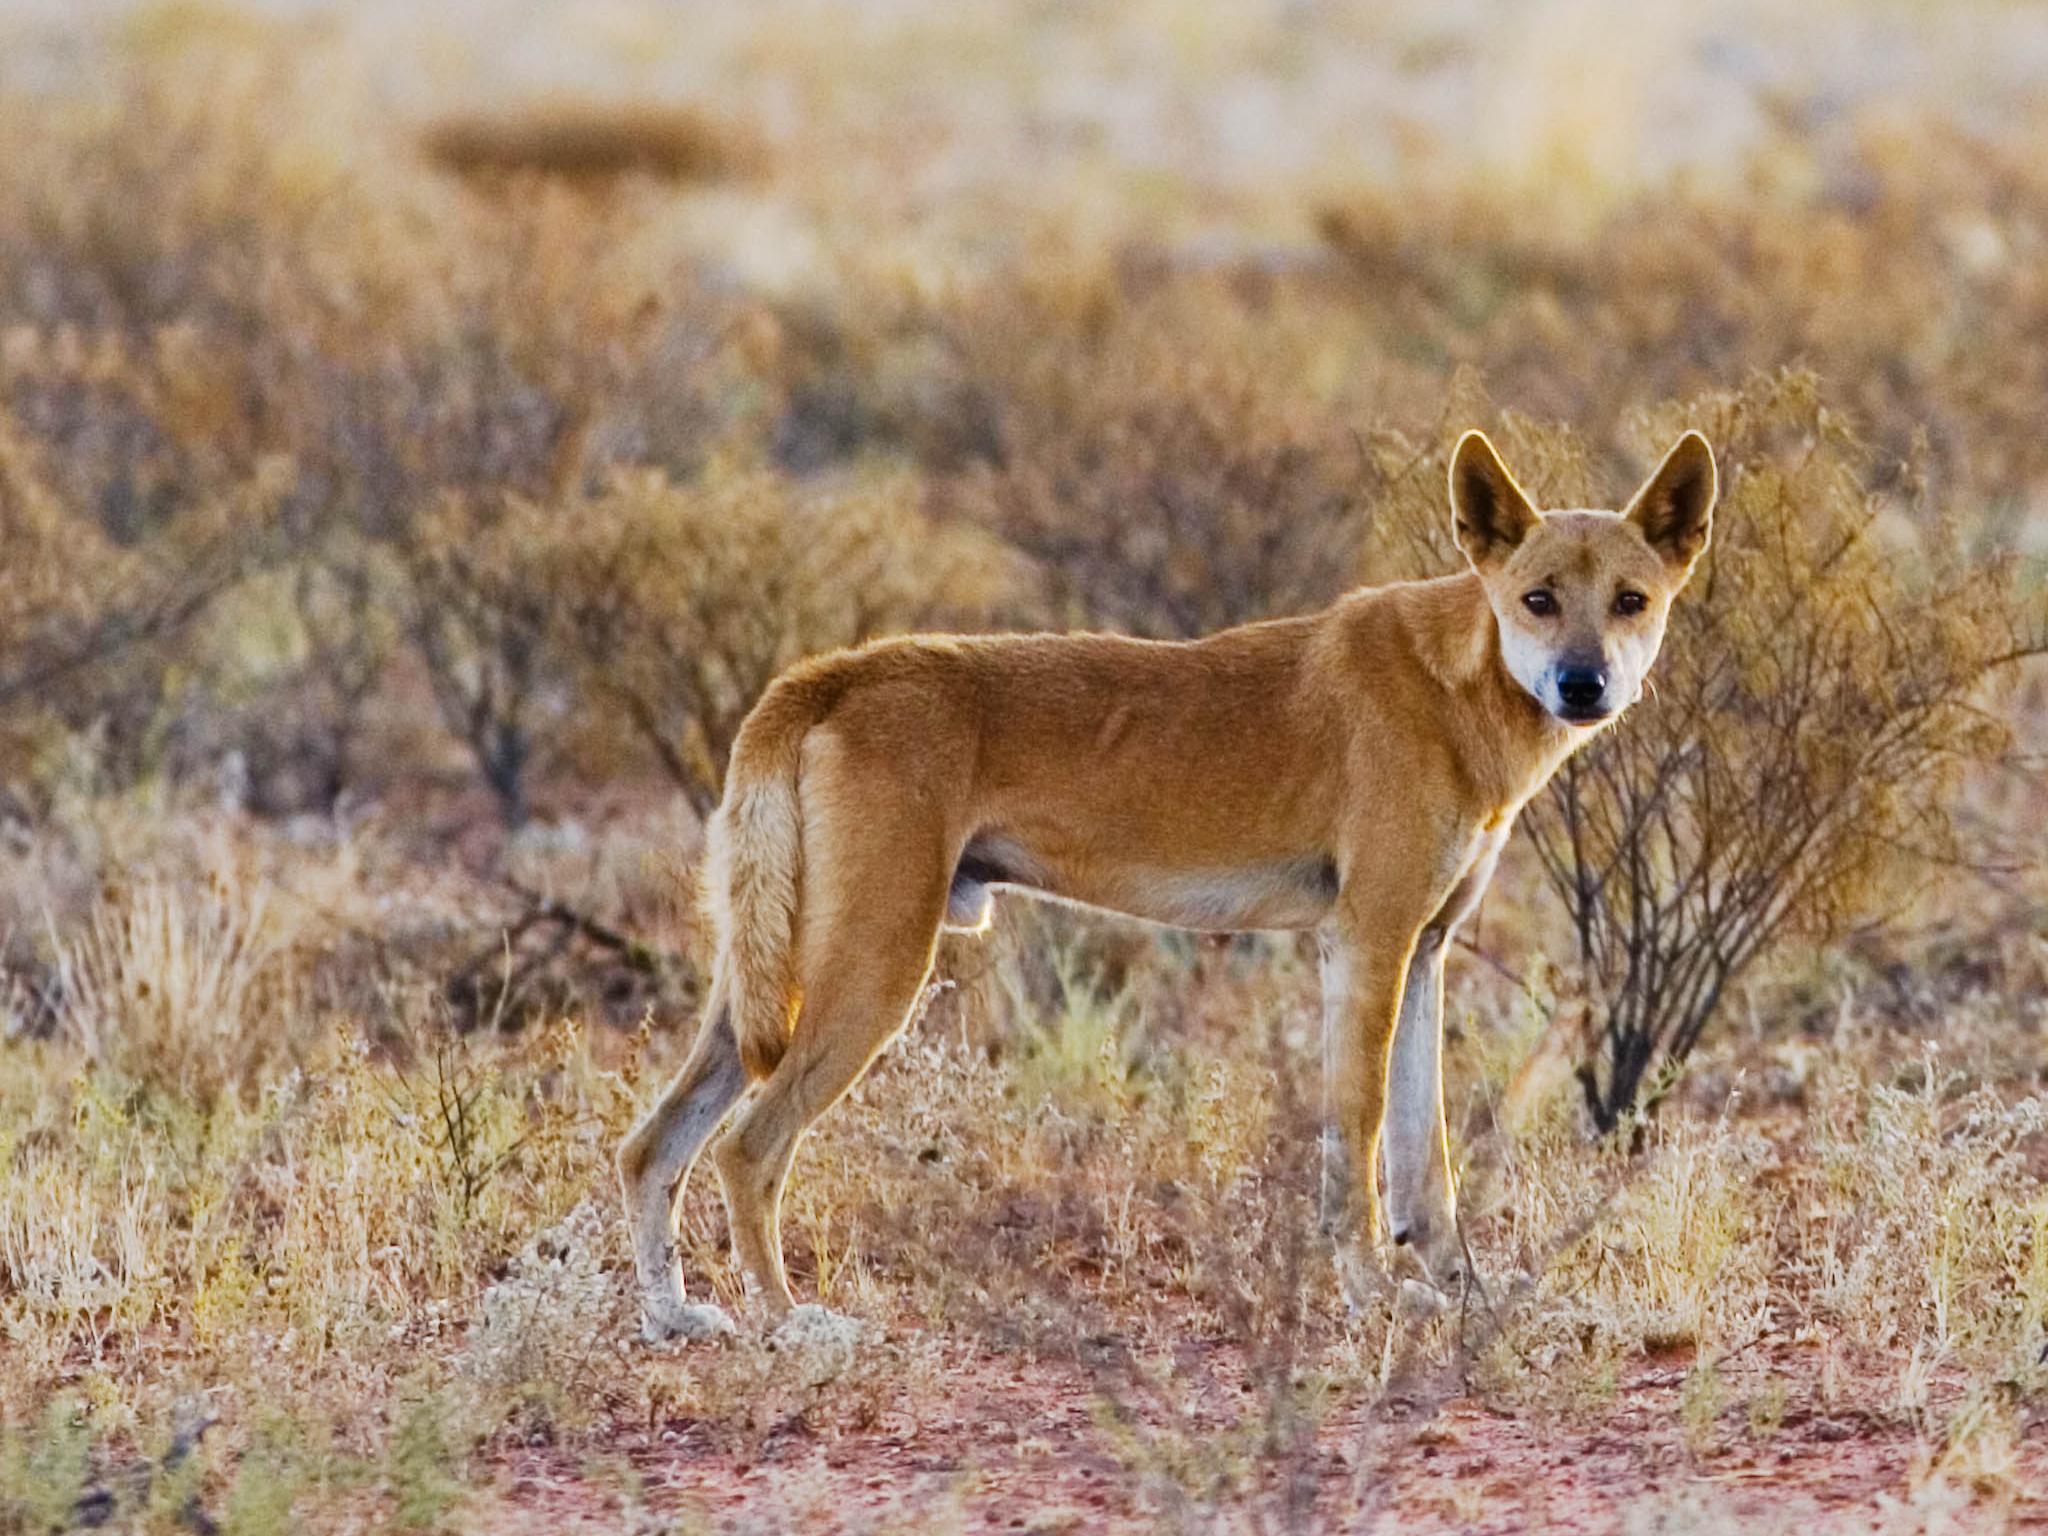 Dr Ben Allen believes cross-breed dingos are having a negative impact on local sheep rearing